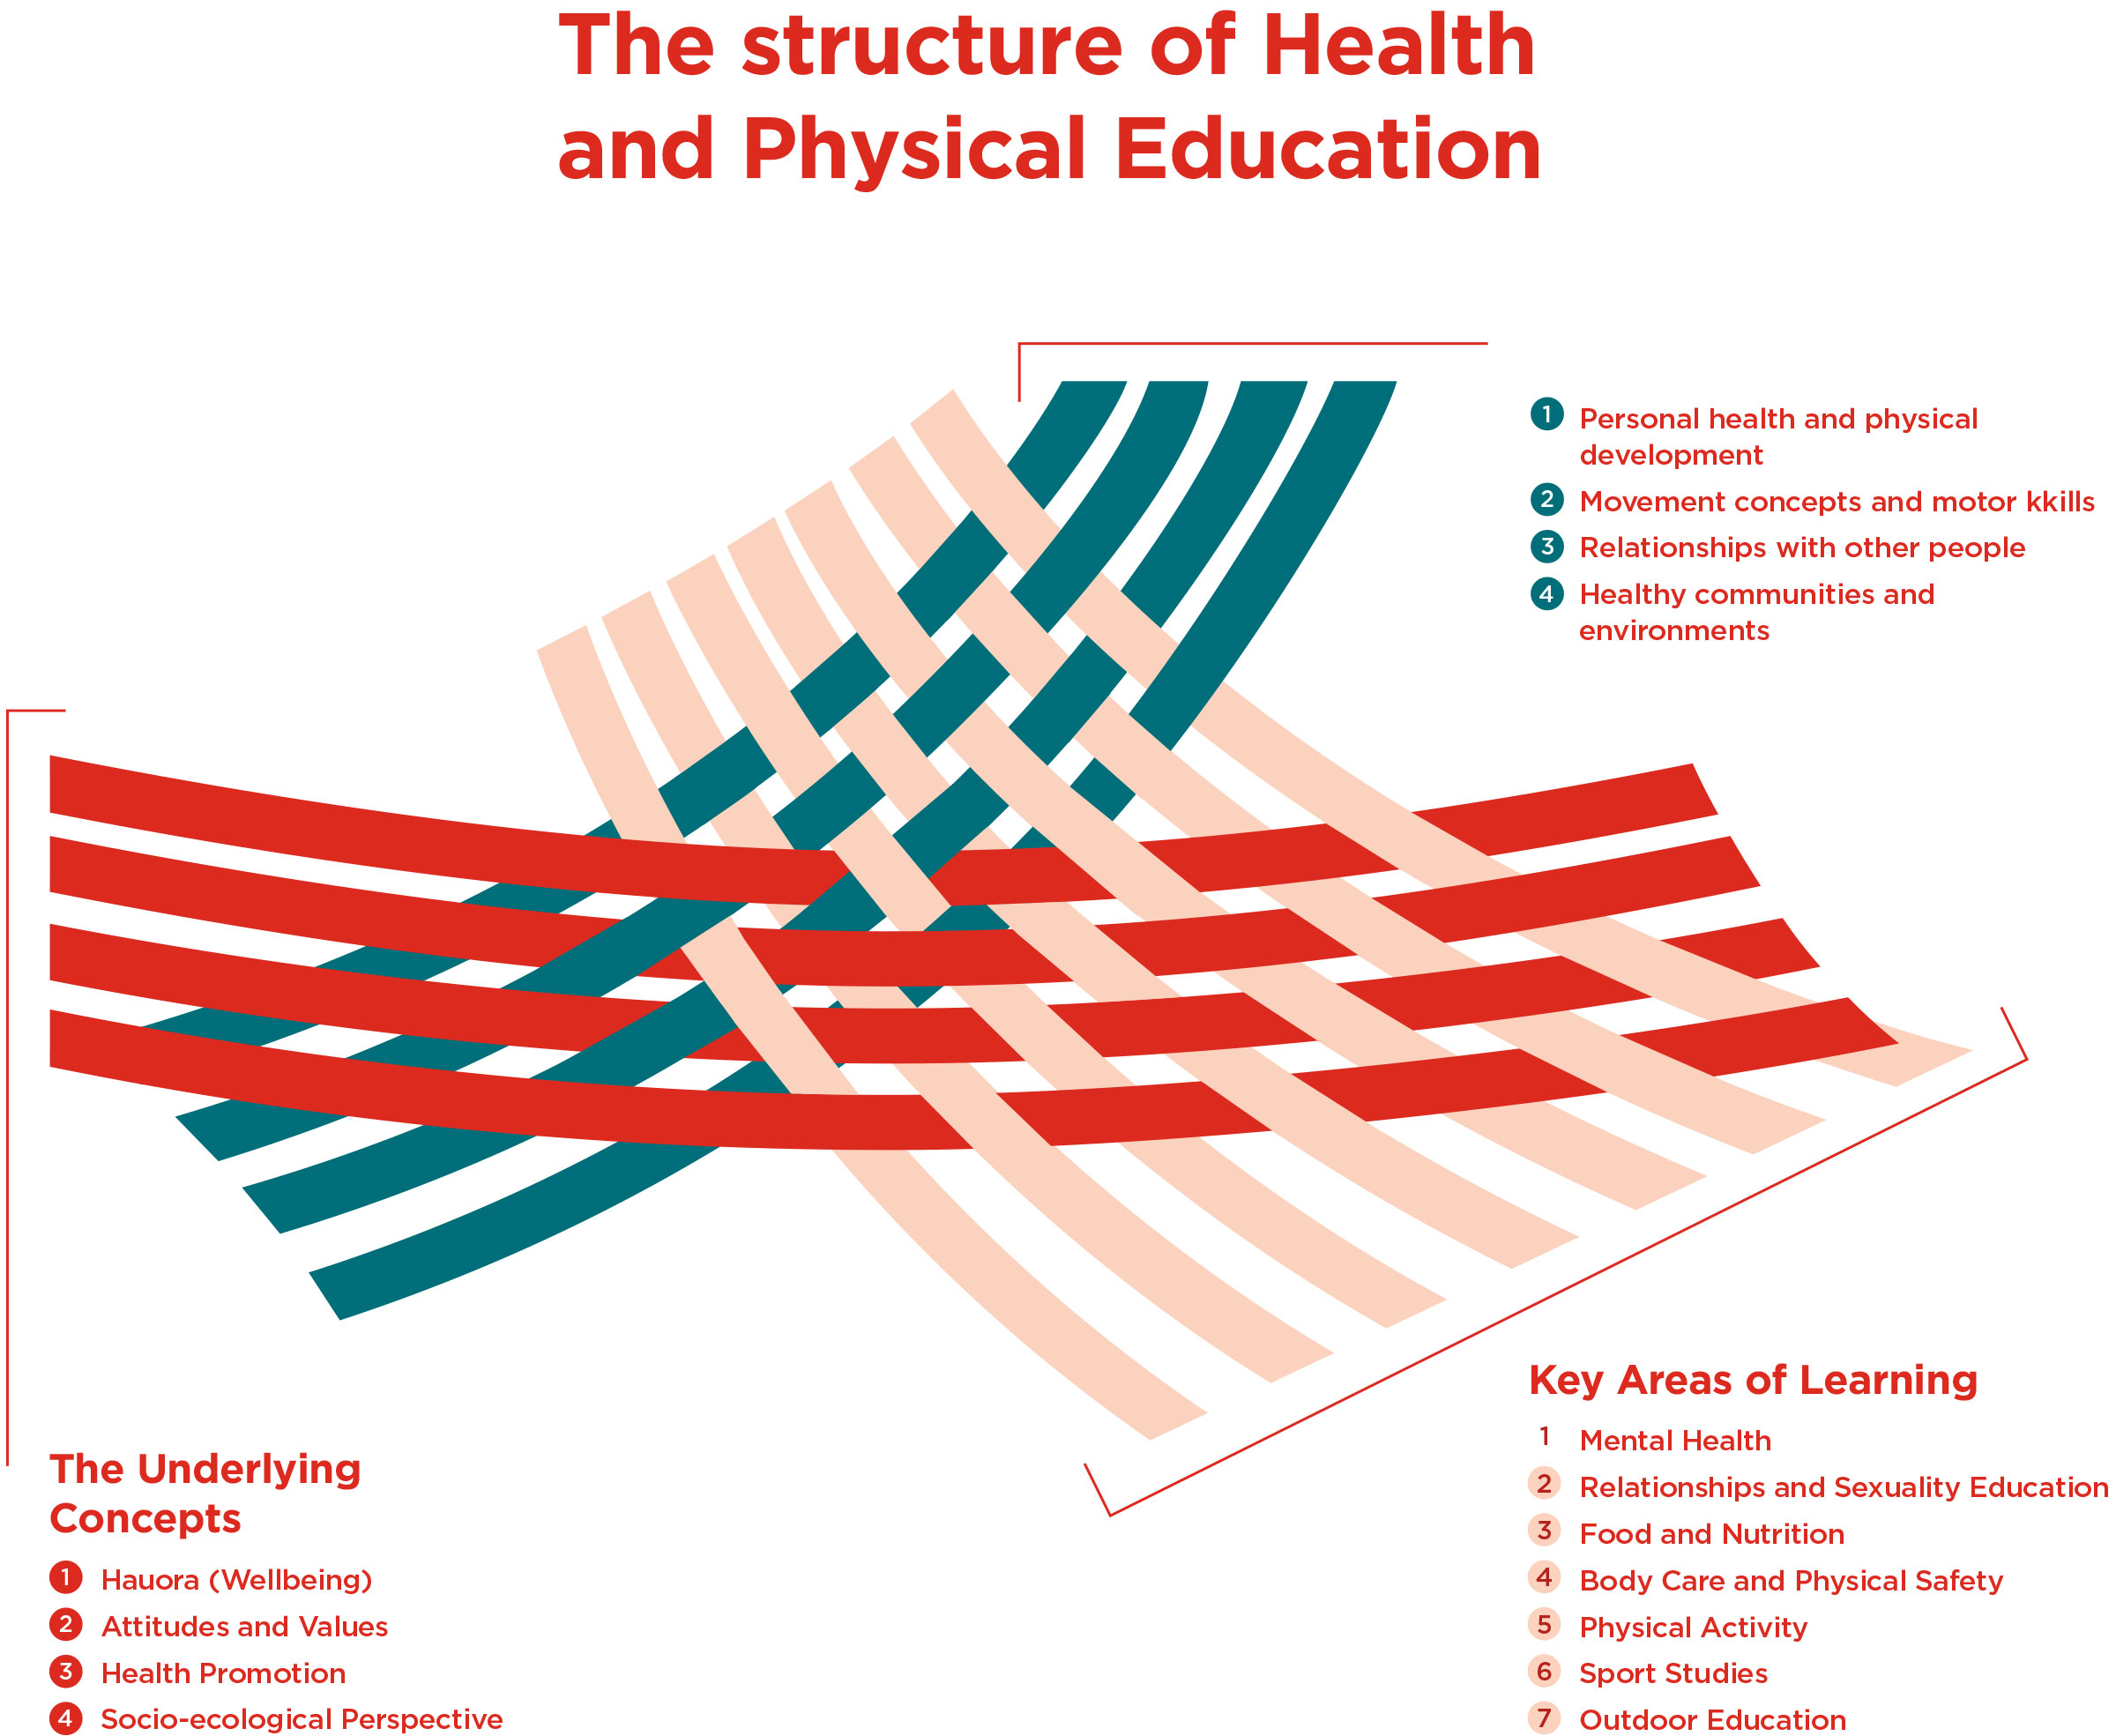 A diagram called The Structure of Health and Physical Education that illustrates how the underlying concepts and the key areas of learning weave together.